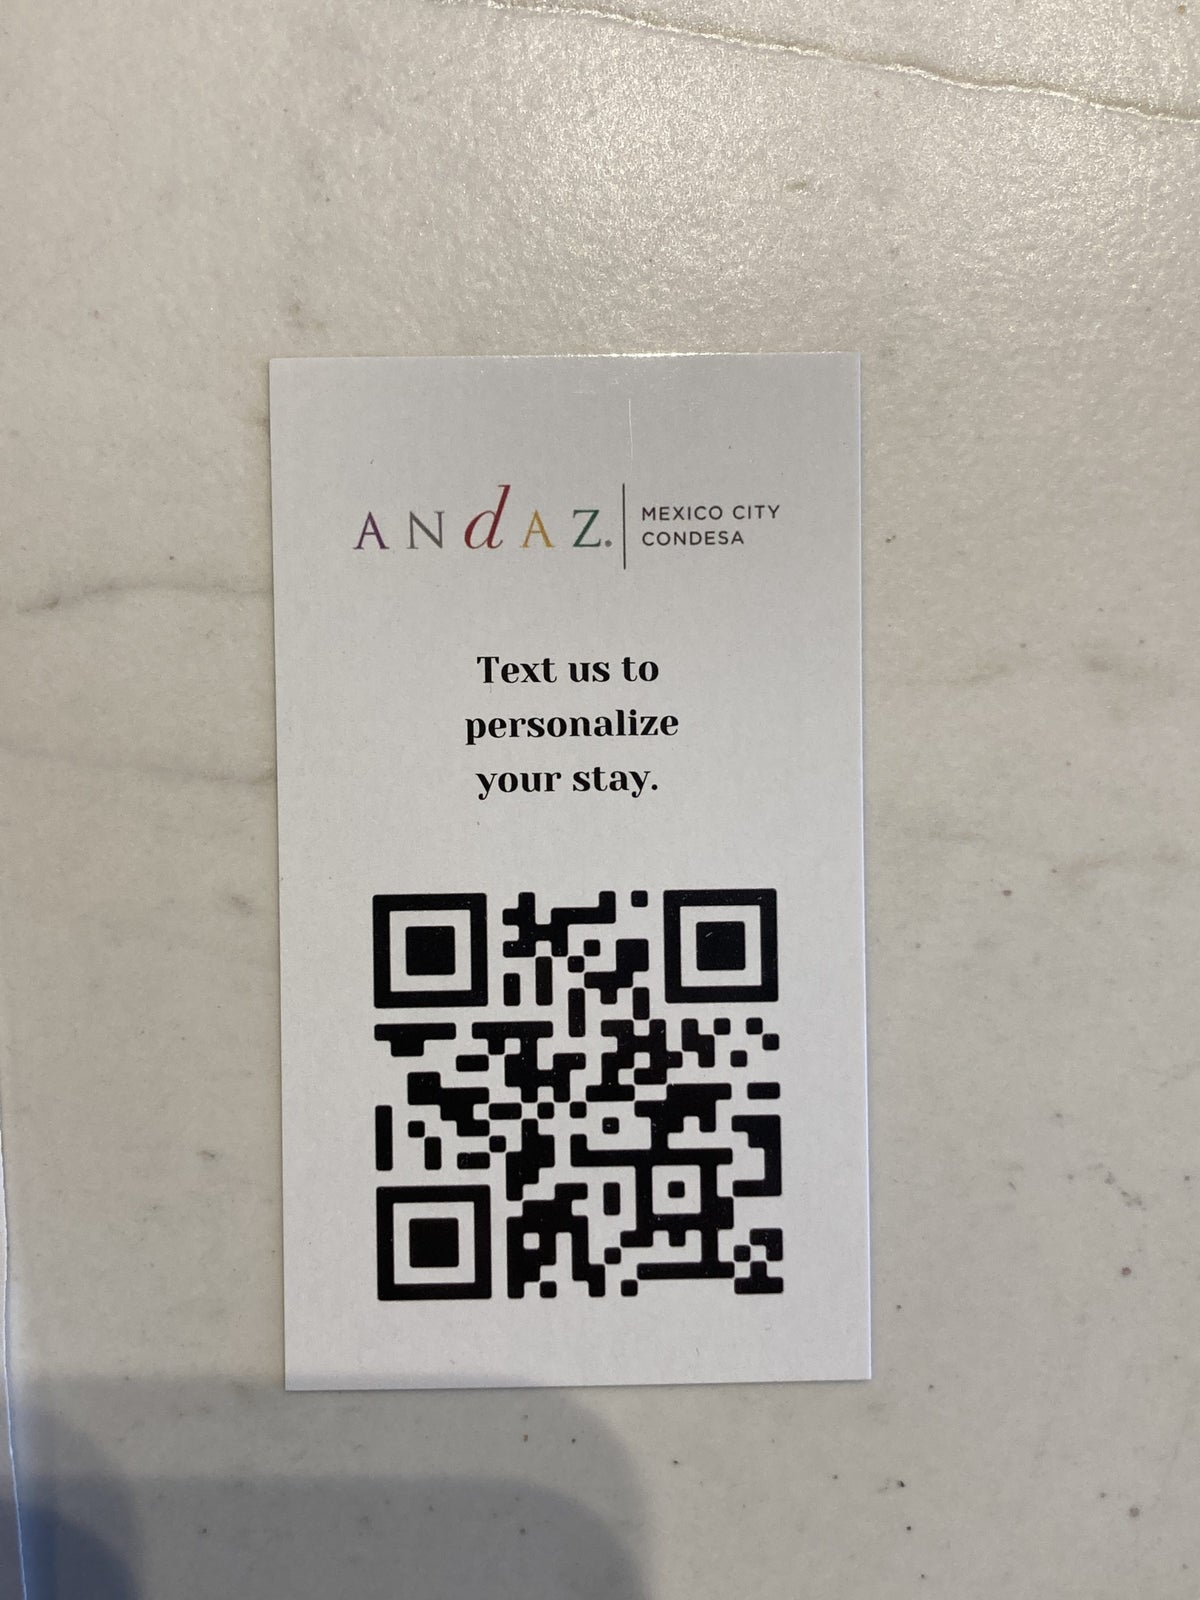 Andaz Mexico City Condesa QR code for text help